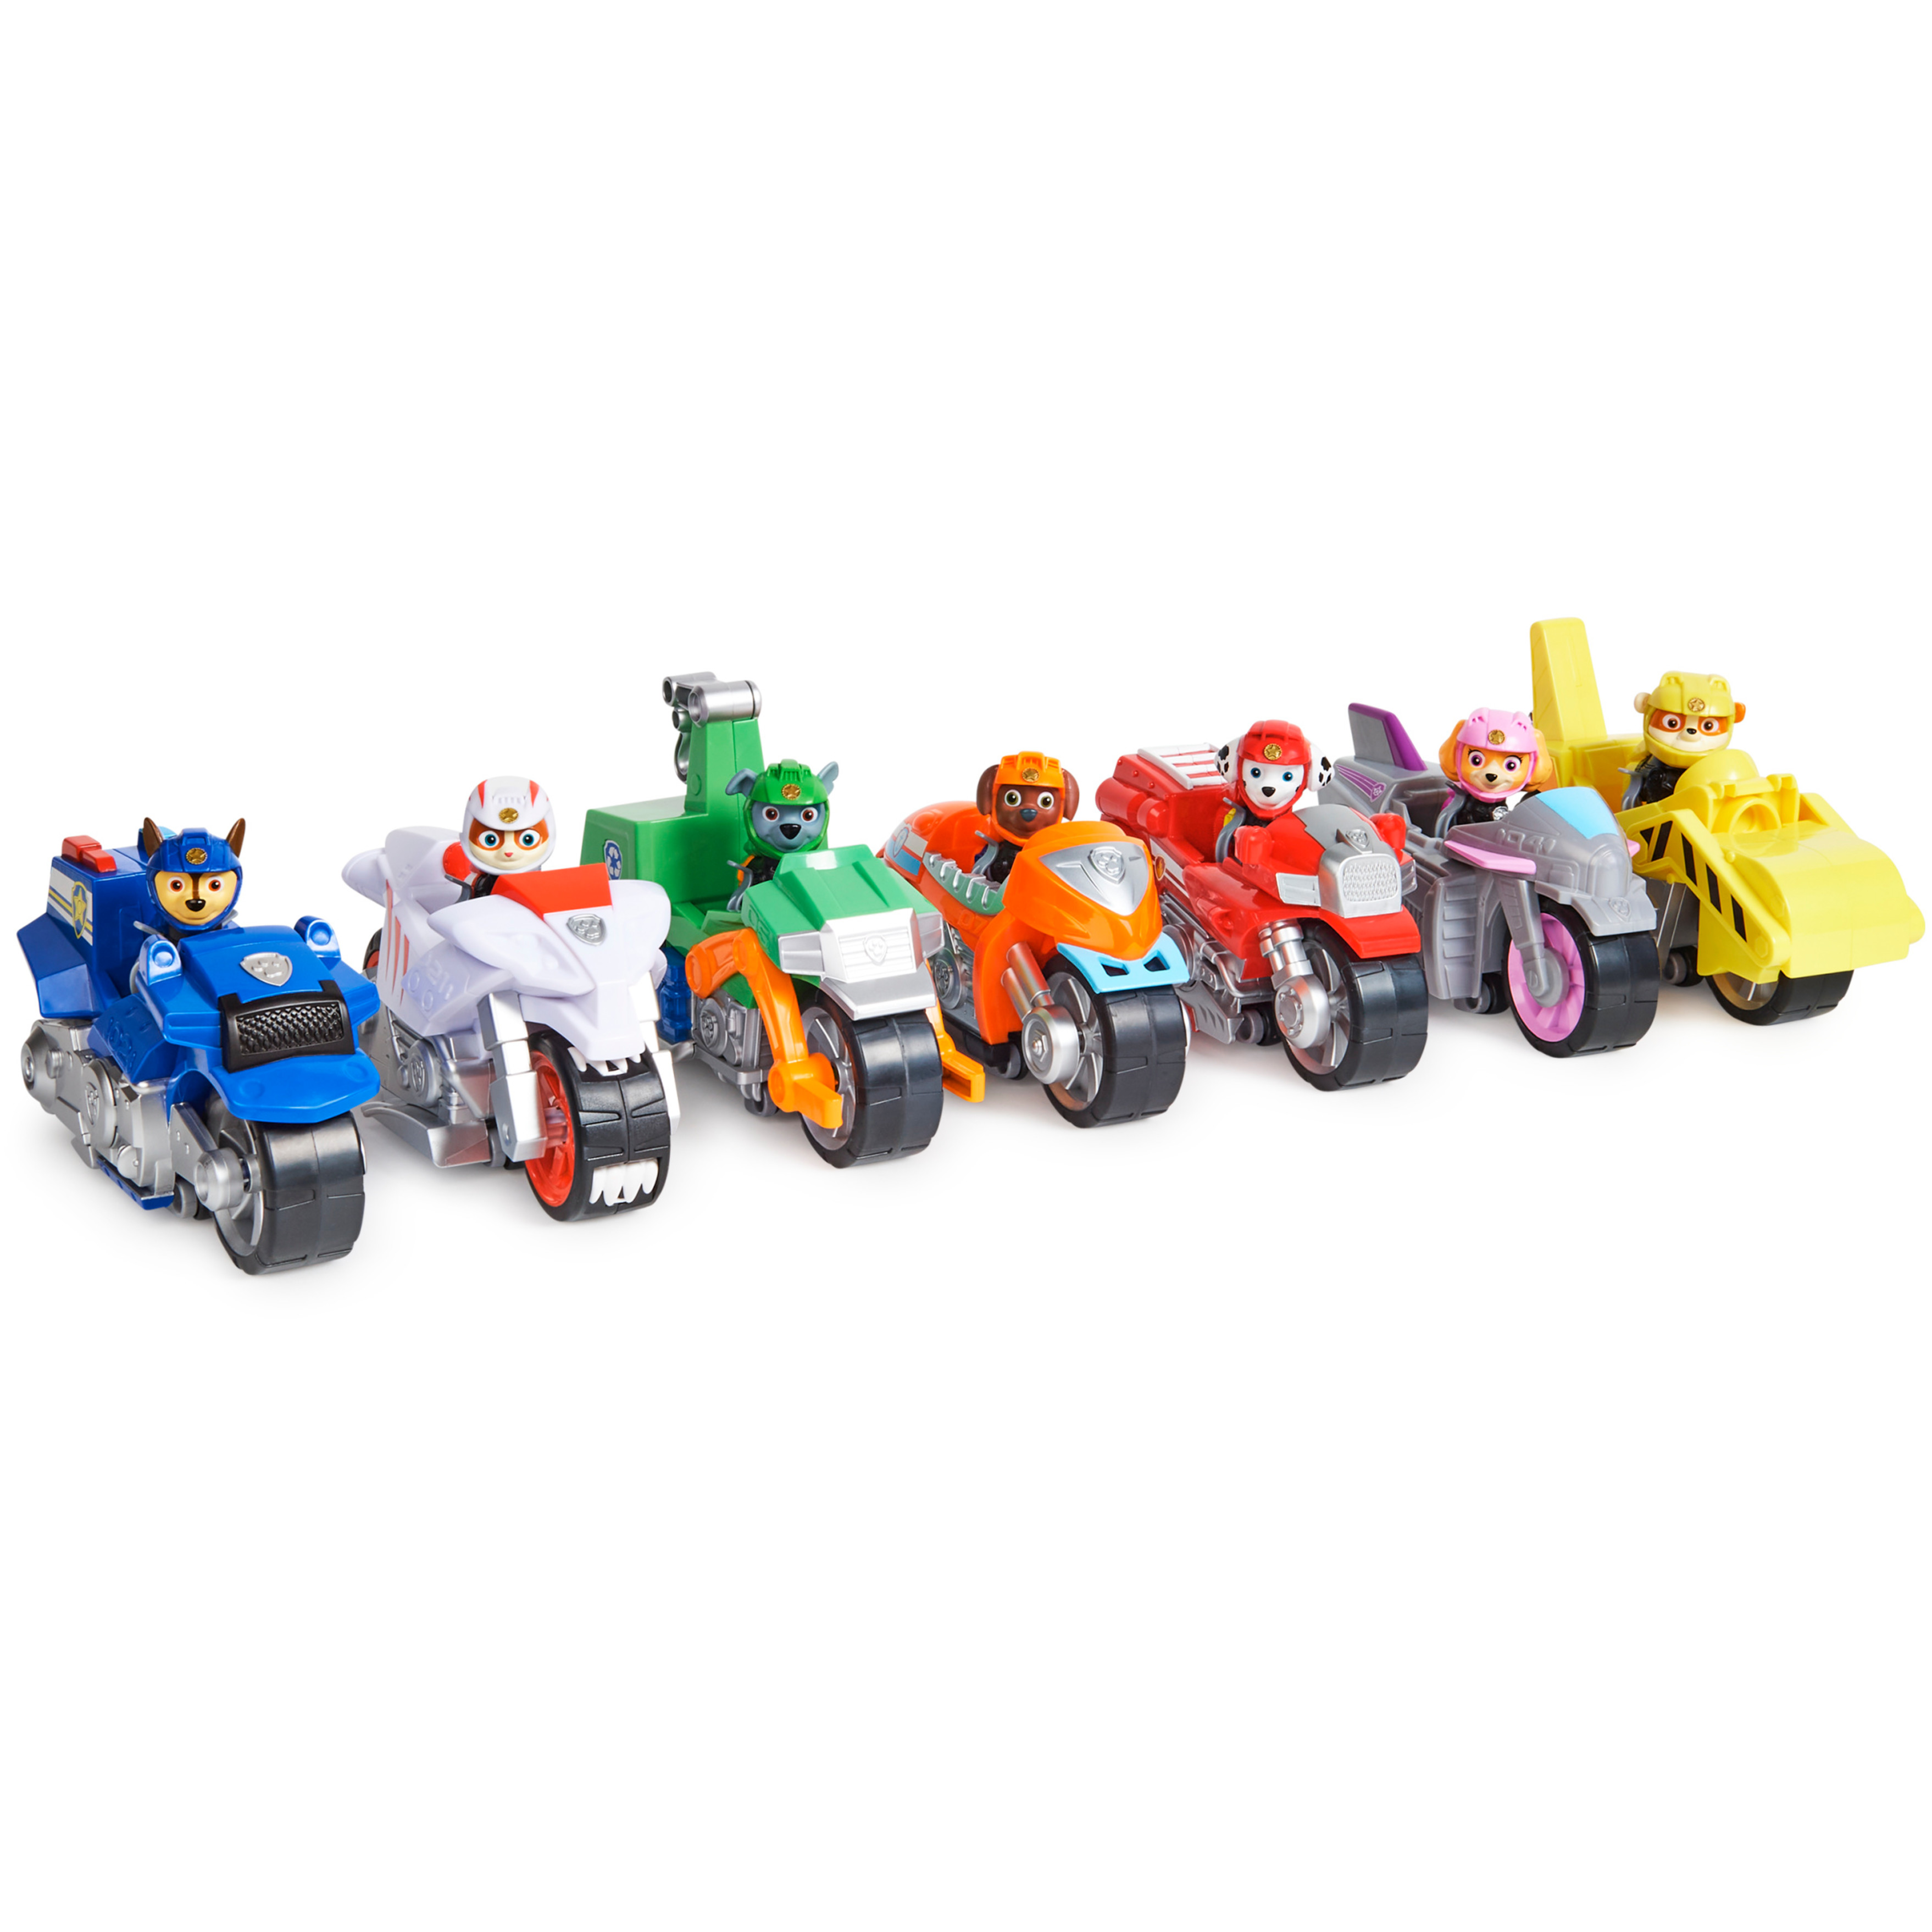 PAW Patrol, Moto Pups Marshall’s Deluxe Pull Back Motorcycle Vehicle with Wheelie Feature and Figure - image 7 of 7